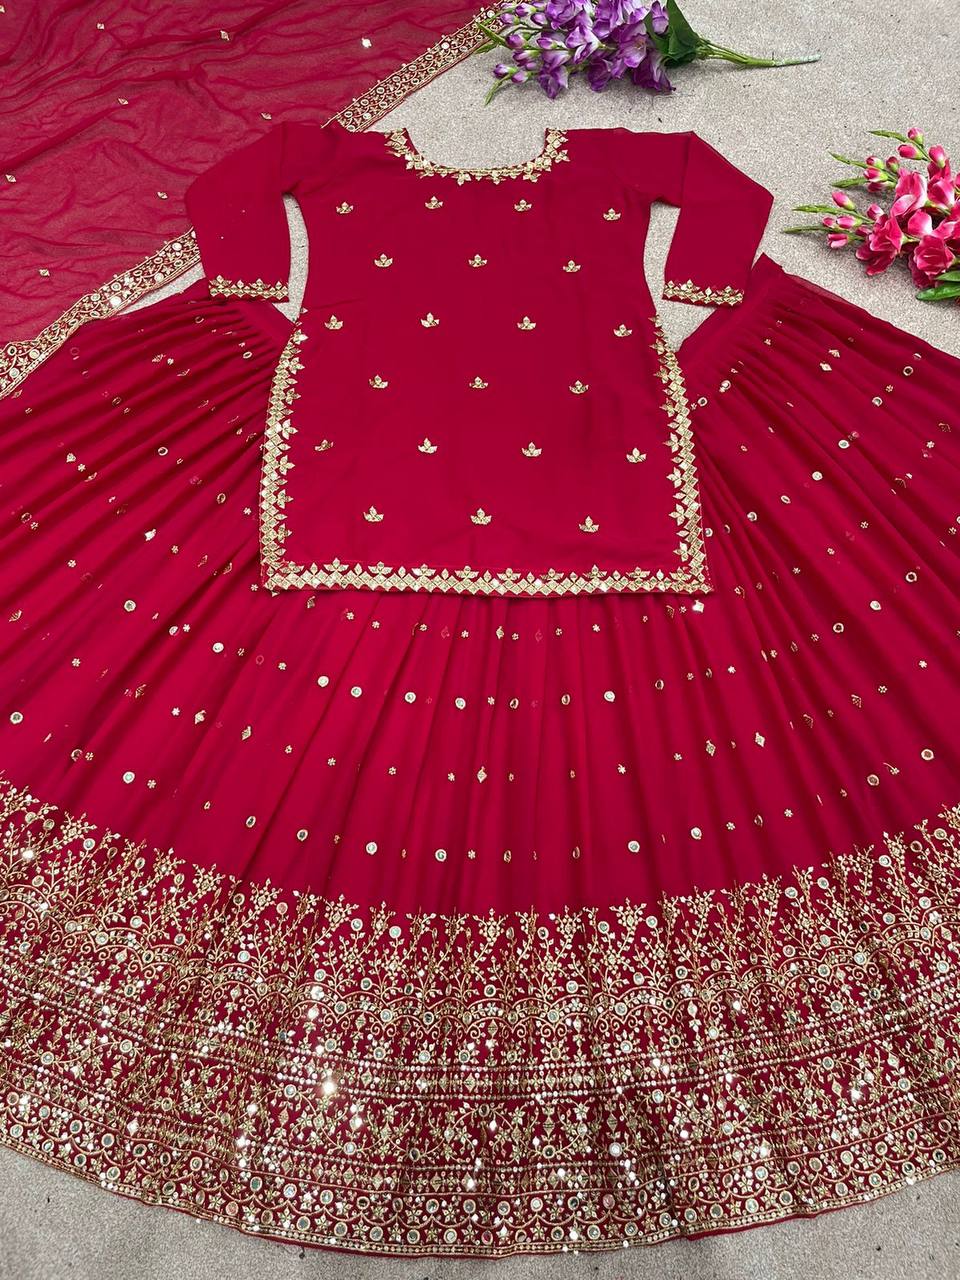 Marvelous Embroidery Work Pink Color Lehenga With Top